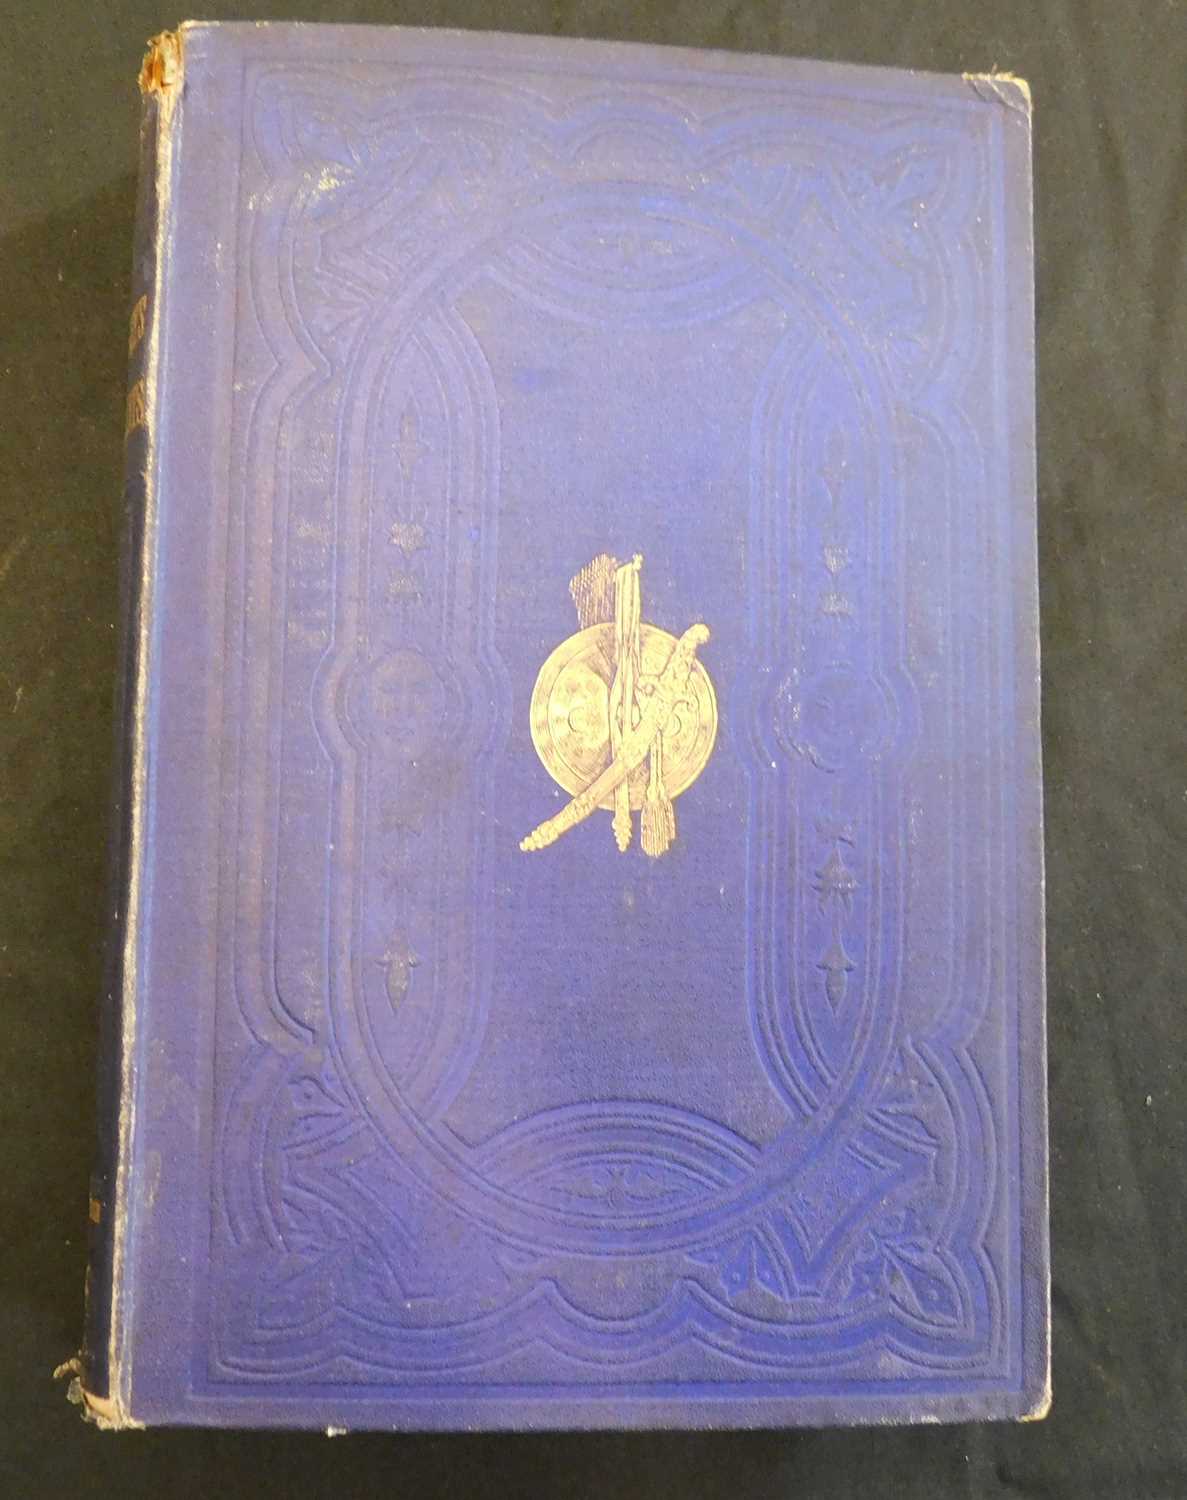 THE ARABIAN NIGHTS ENTERTAINMENTS TRANSLATED FROM THE ARABIC, ill S J Groves, Edinburgh, William P - Image 2 of 2